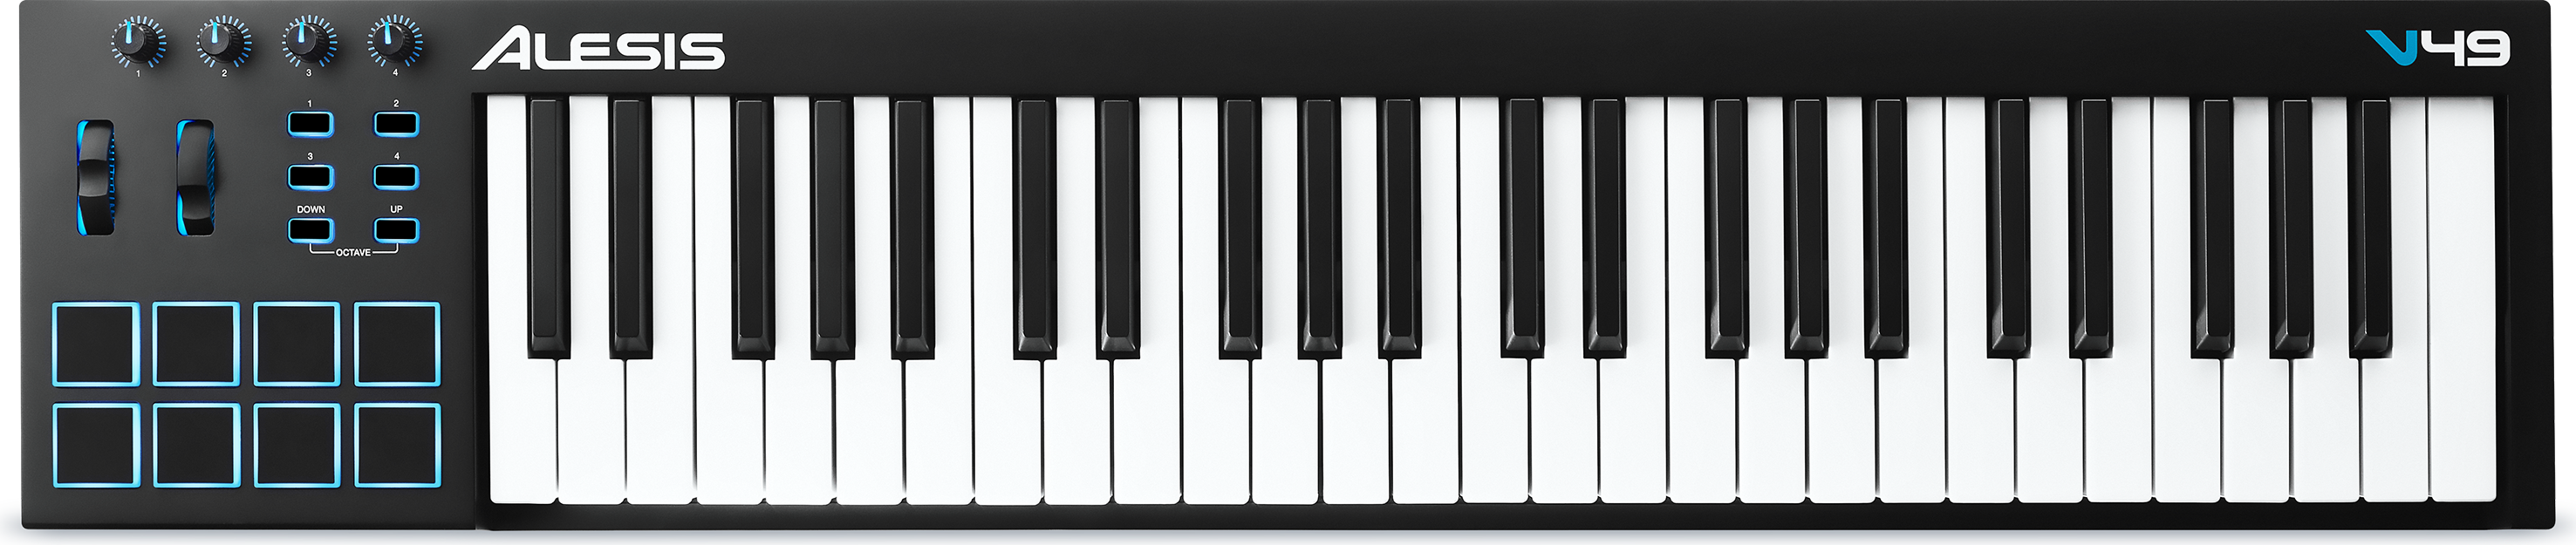 Alesis V49 - Controller-Keyboard - Main picture